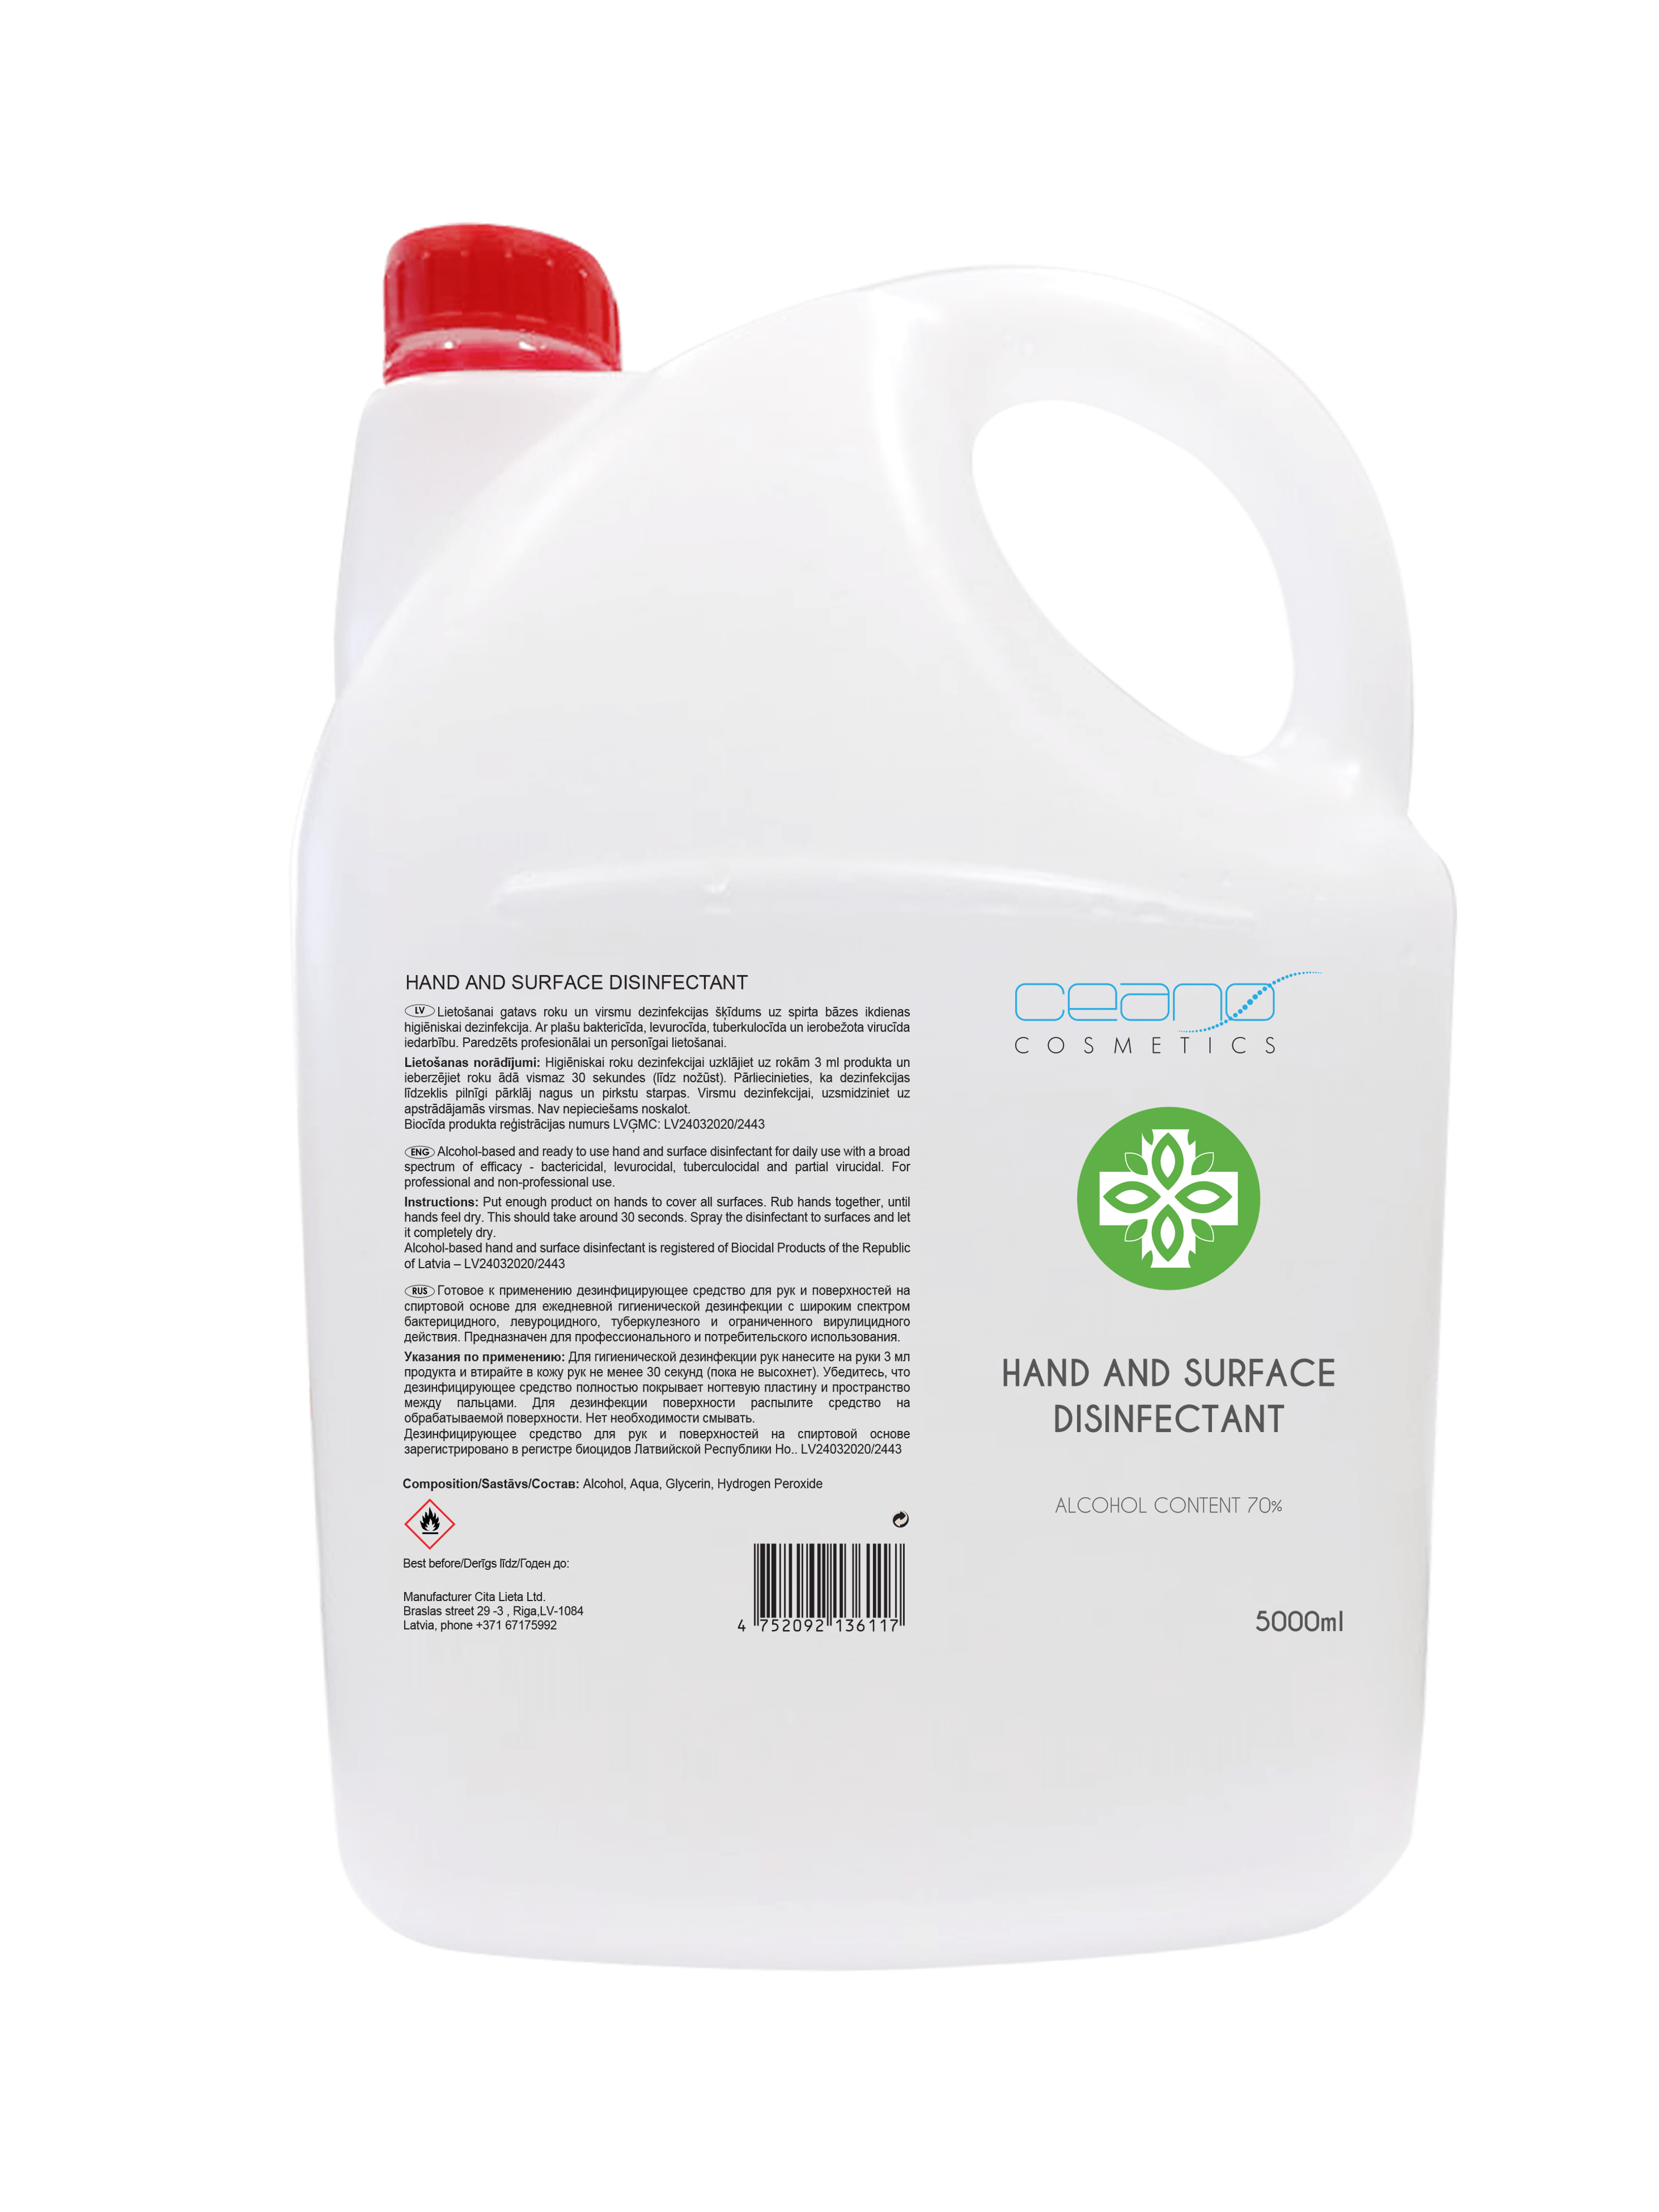 NEW! Alcohol-based hand and surface disinfectant